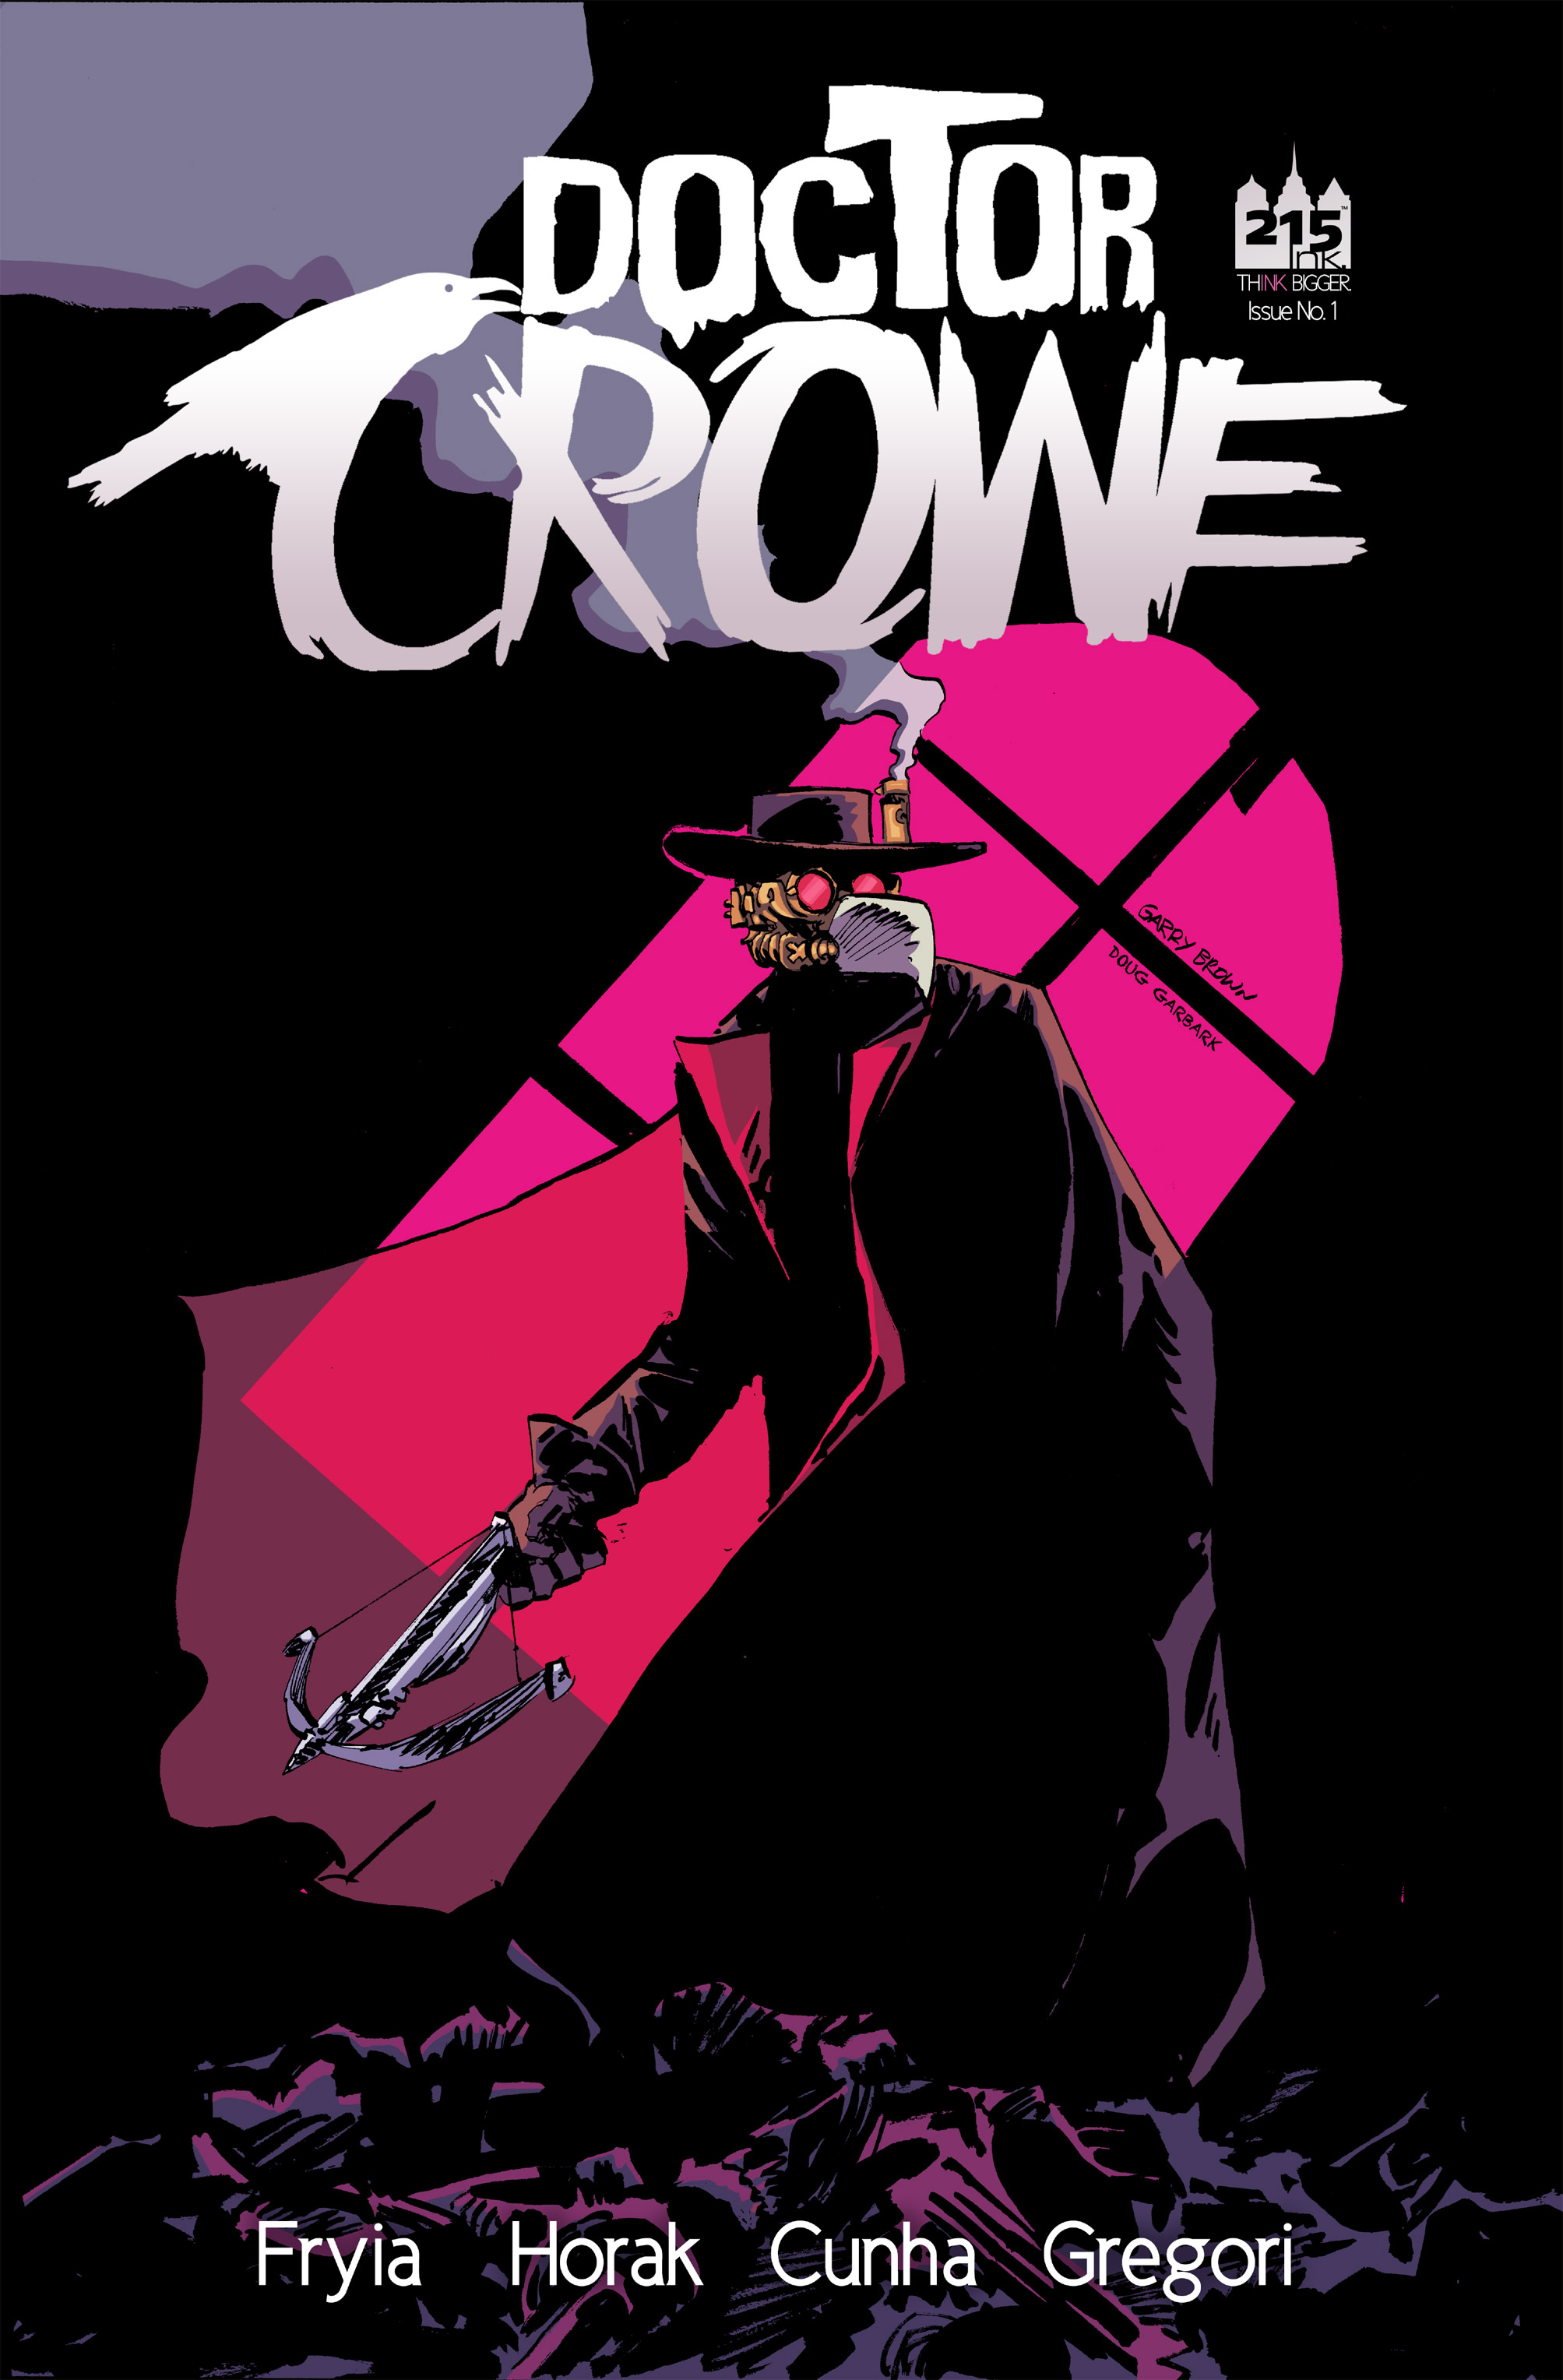 Read online Dr Crowe comic -  Issue # Full - 1